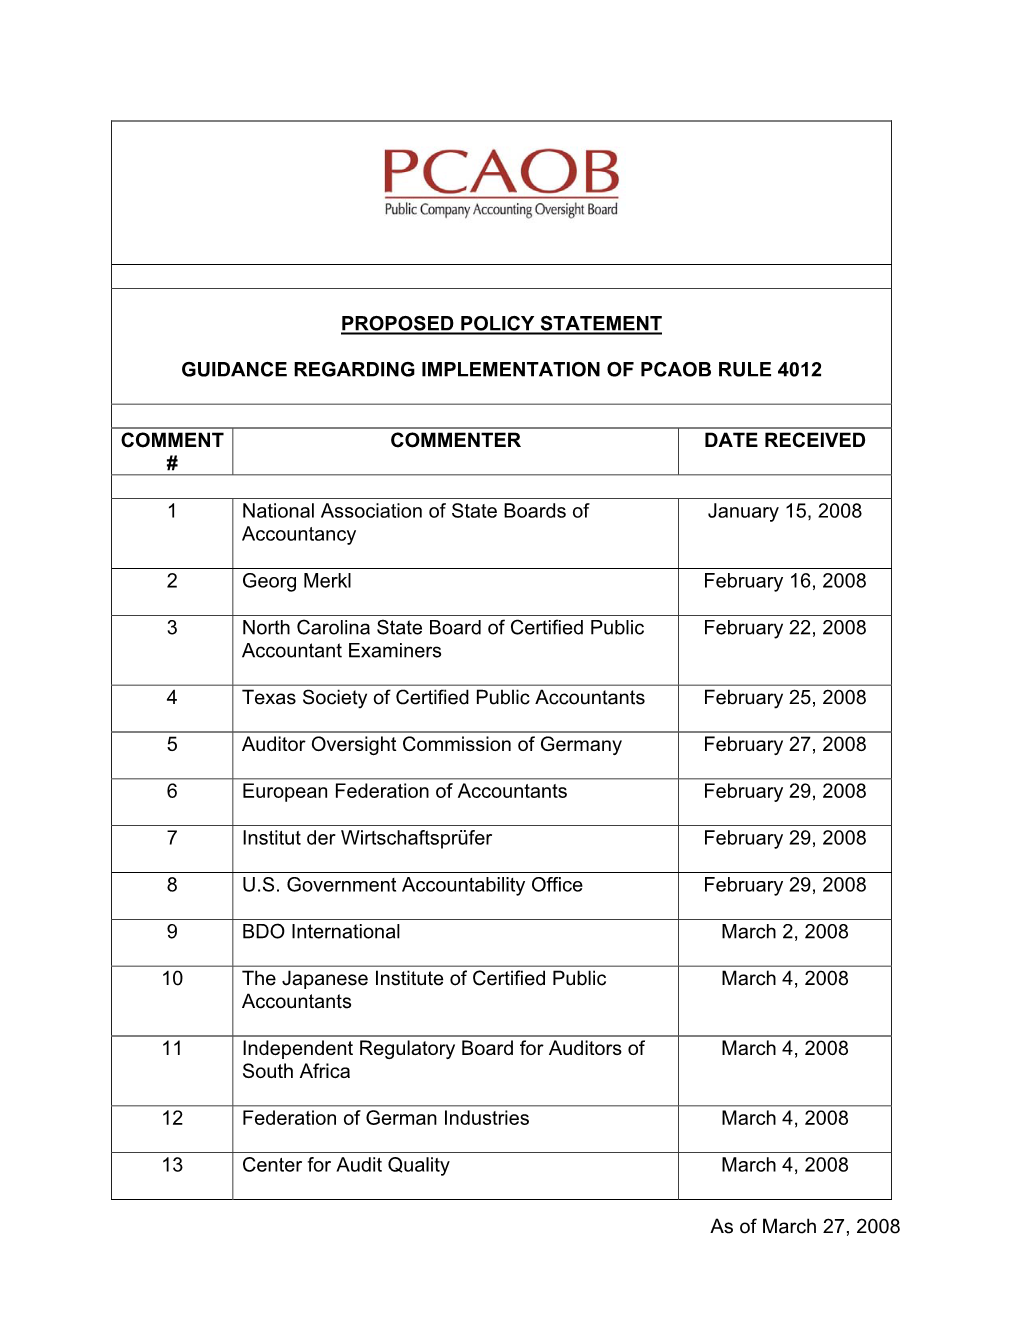 As of March 27, 2008 PROPOSED POLICY STATEMENT GUIDANCE